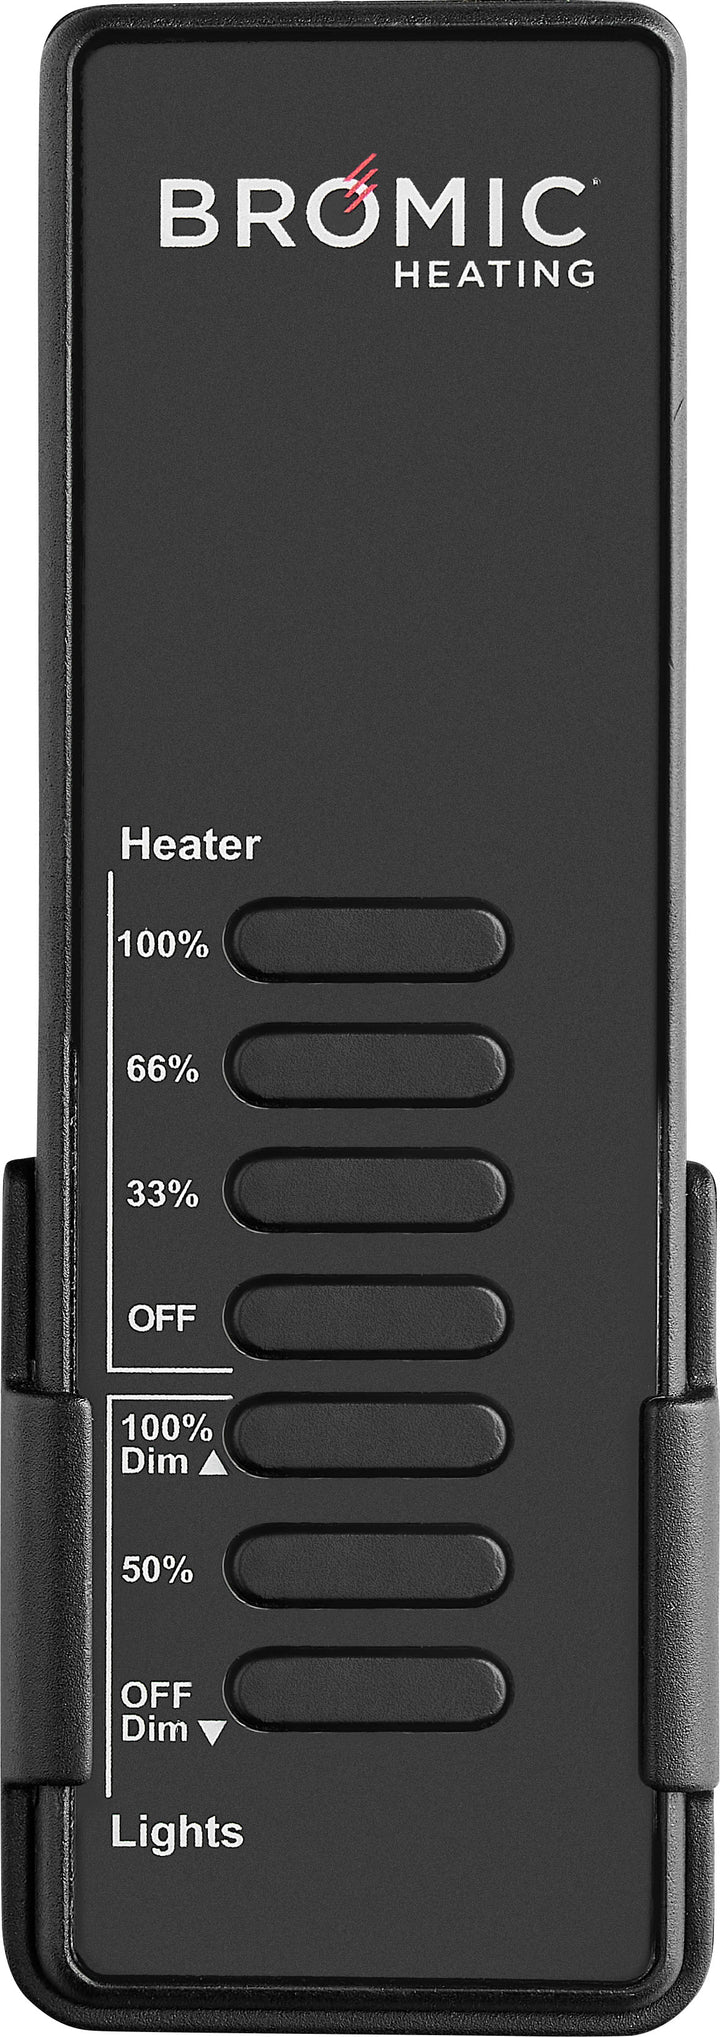 Bromic Heating - Outdoor Heater - Eclipse Electric & Dimmer Controller - 2900W - 220-240V - Black_1